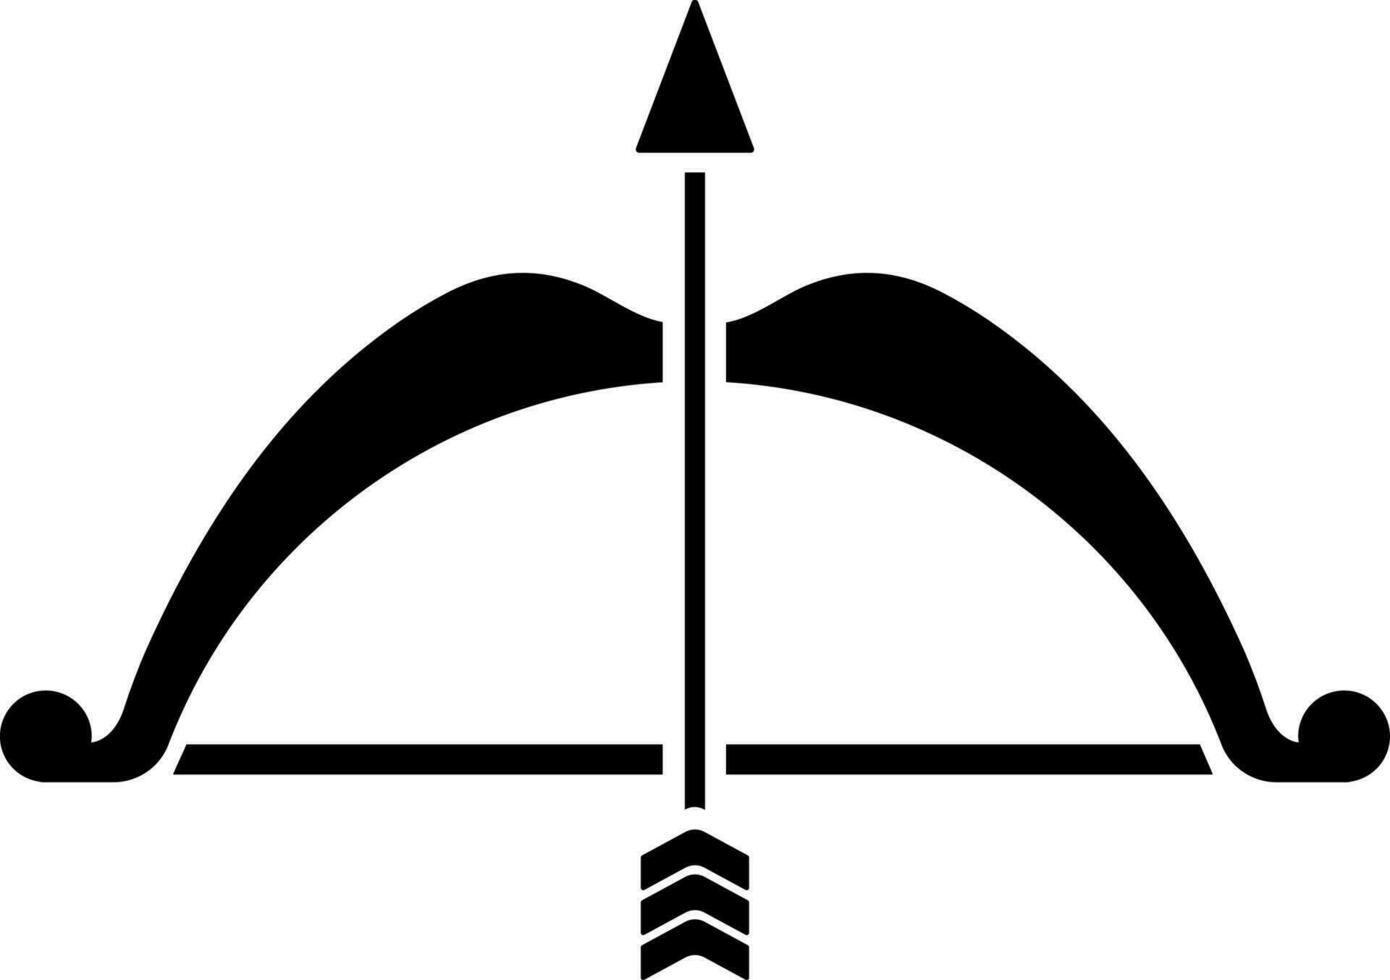 Black and White bow with arrow icon in flat style. vector